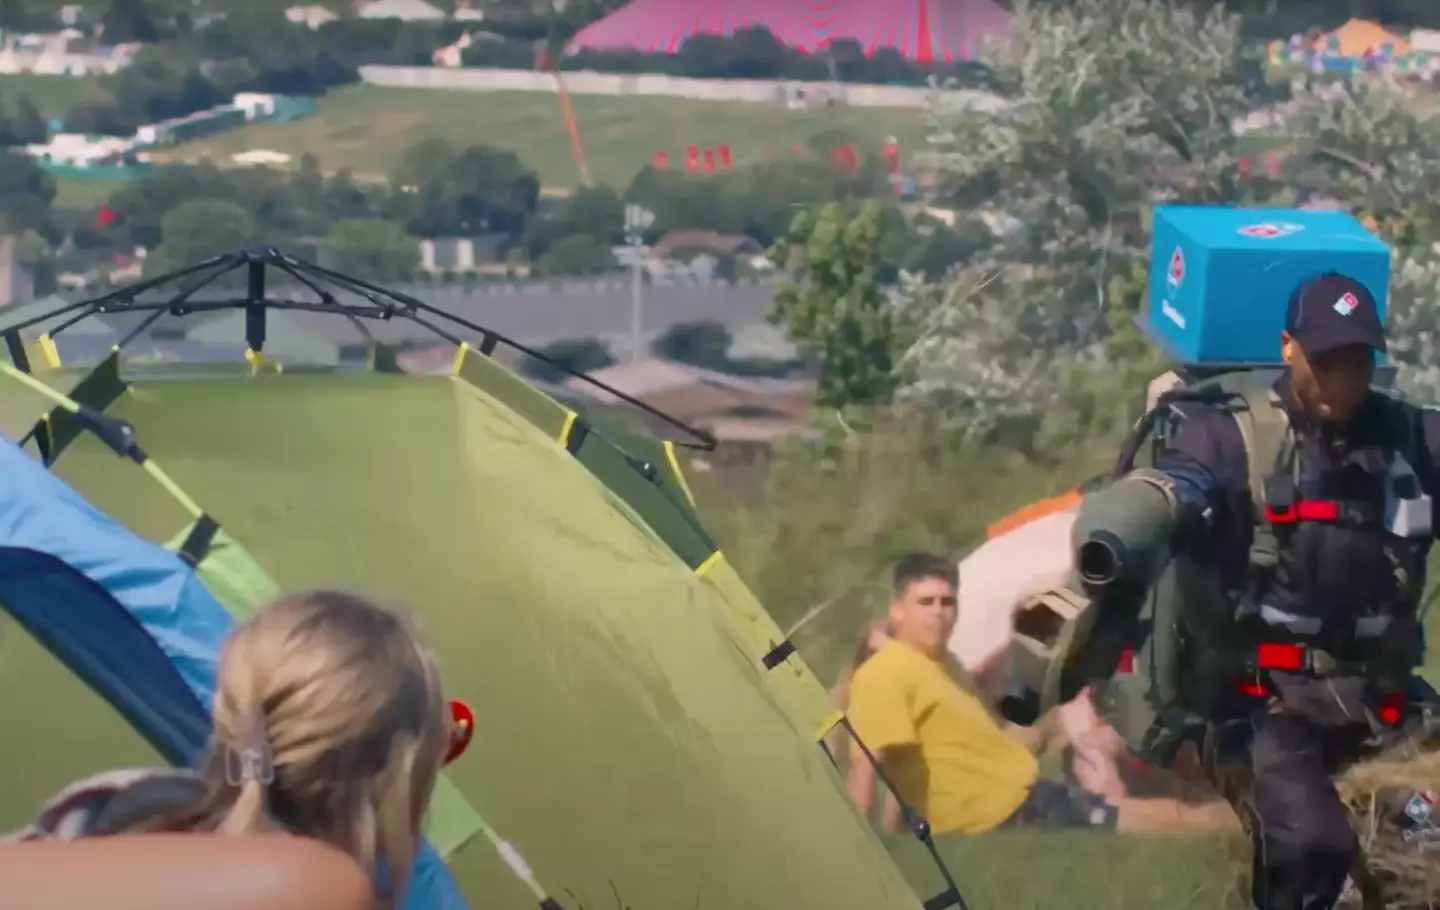 Imaging opening your tent to see a Domino's deliver driver with a jet pack.